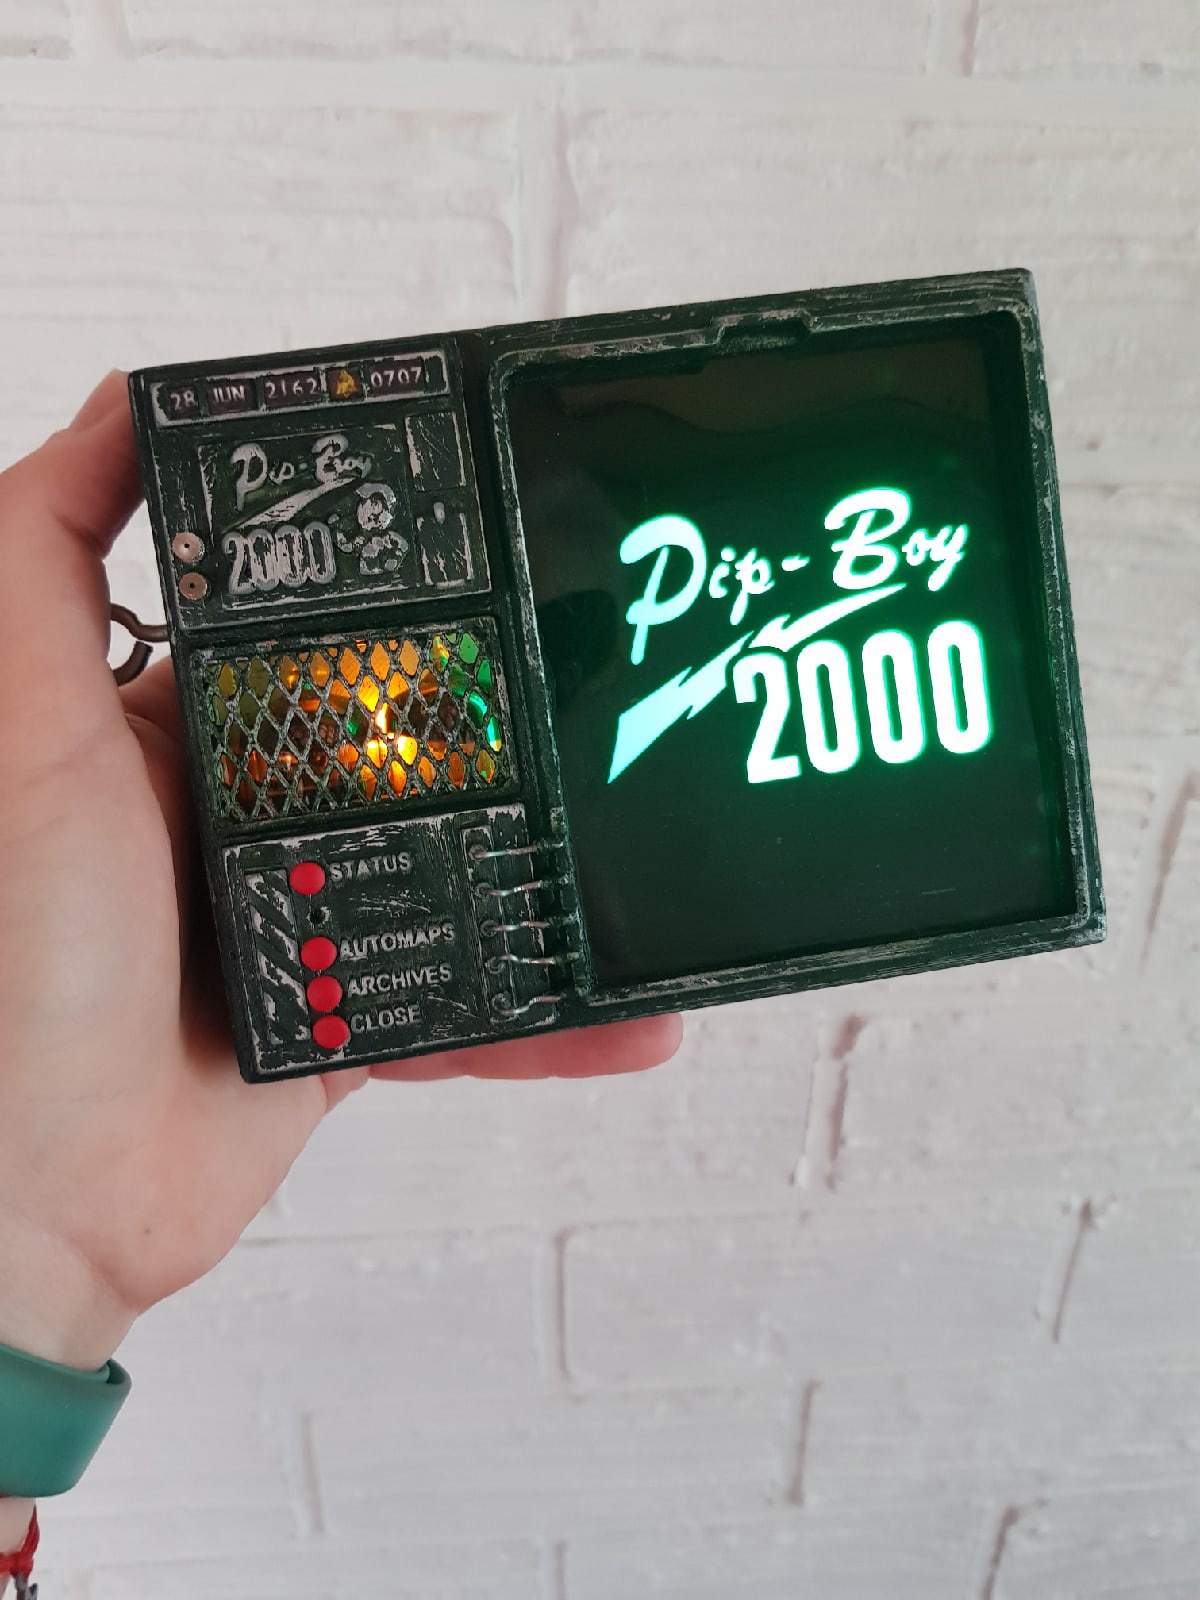 Pip-boy - perfect gift for Fallout fans. Free fast shipping!